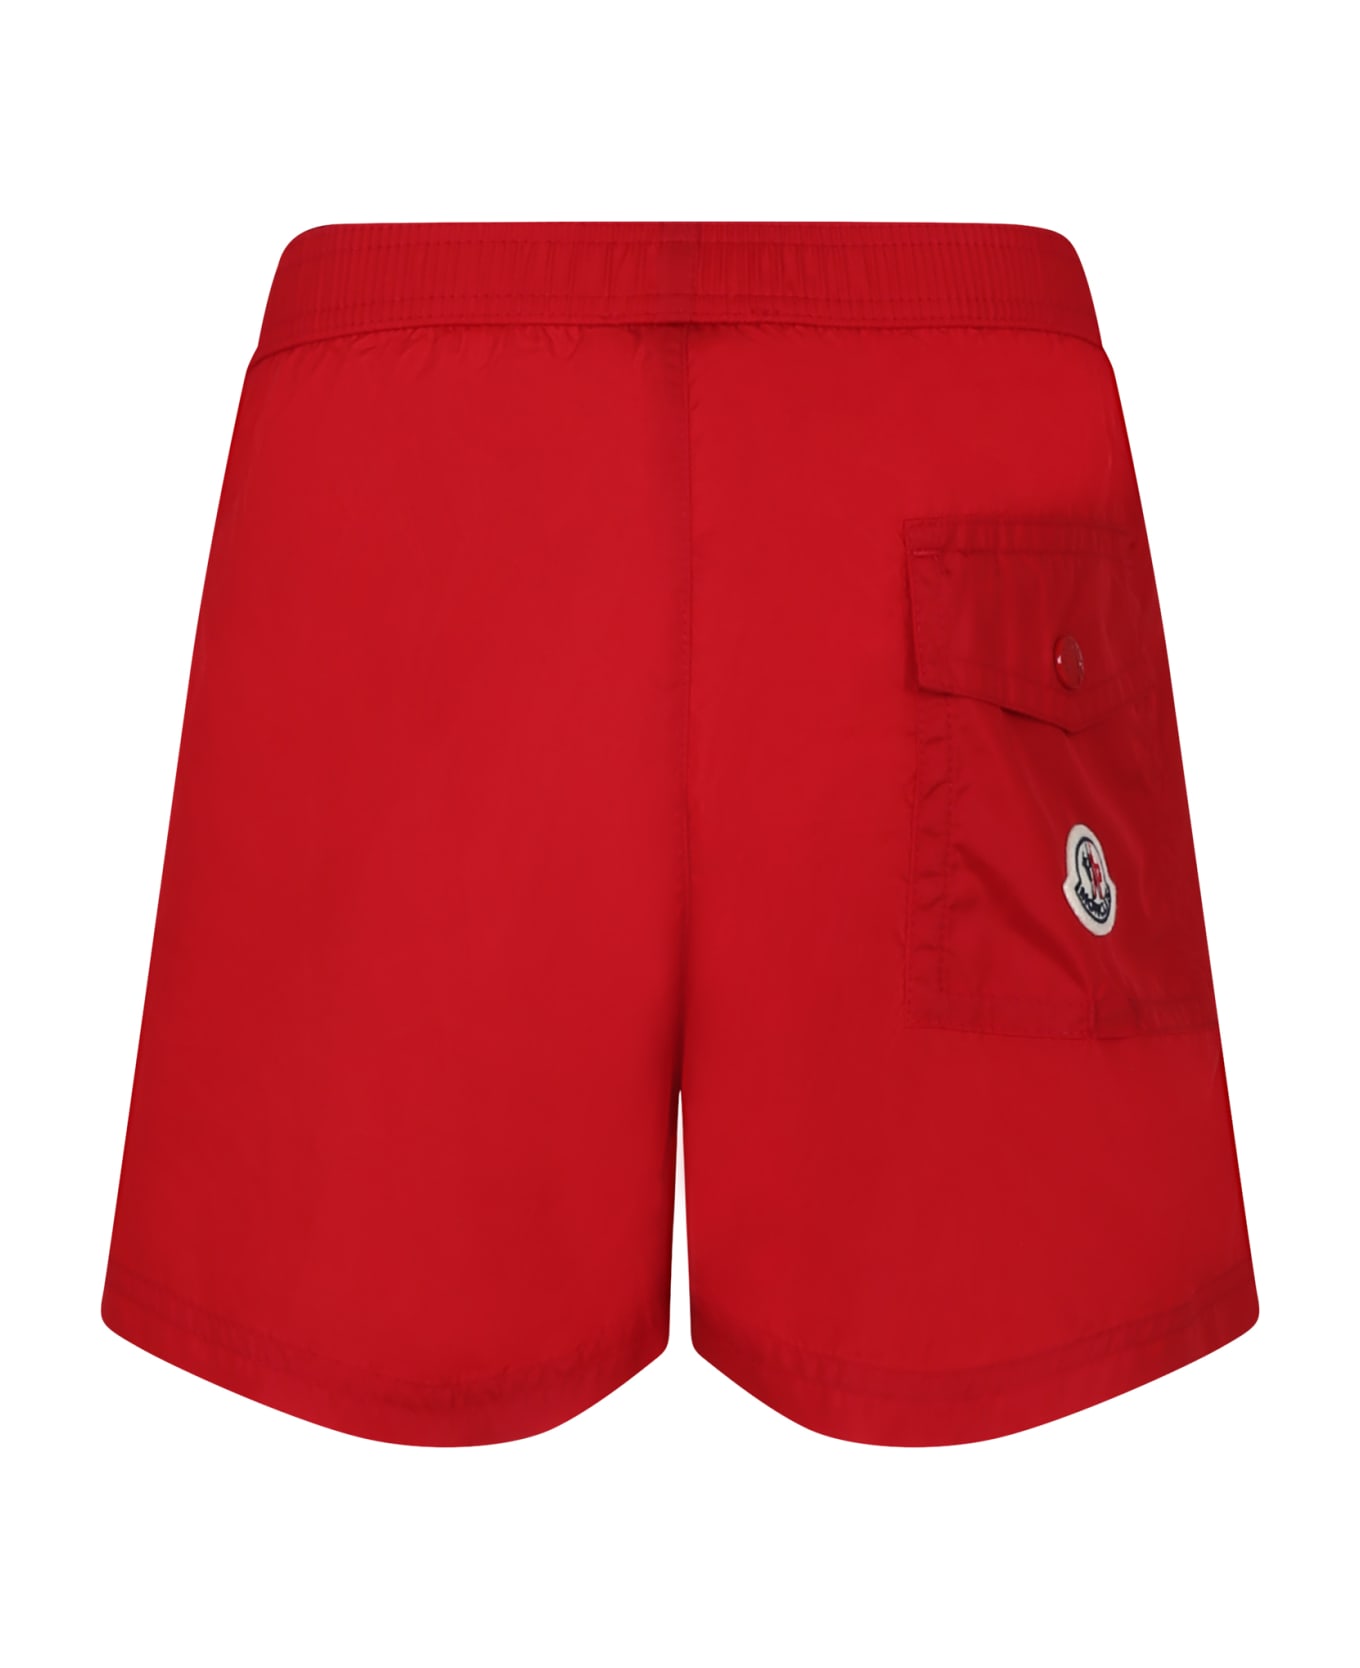 Moncler Red Swim Shorts Fo Boy With Logo - Red 水着